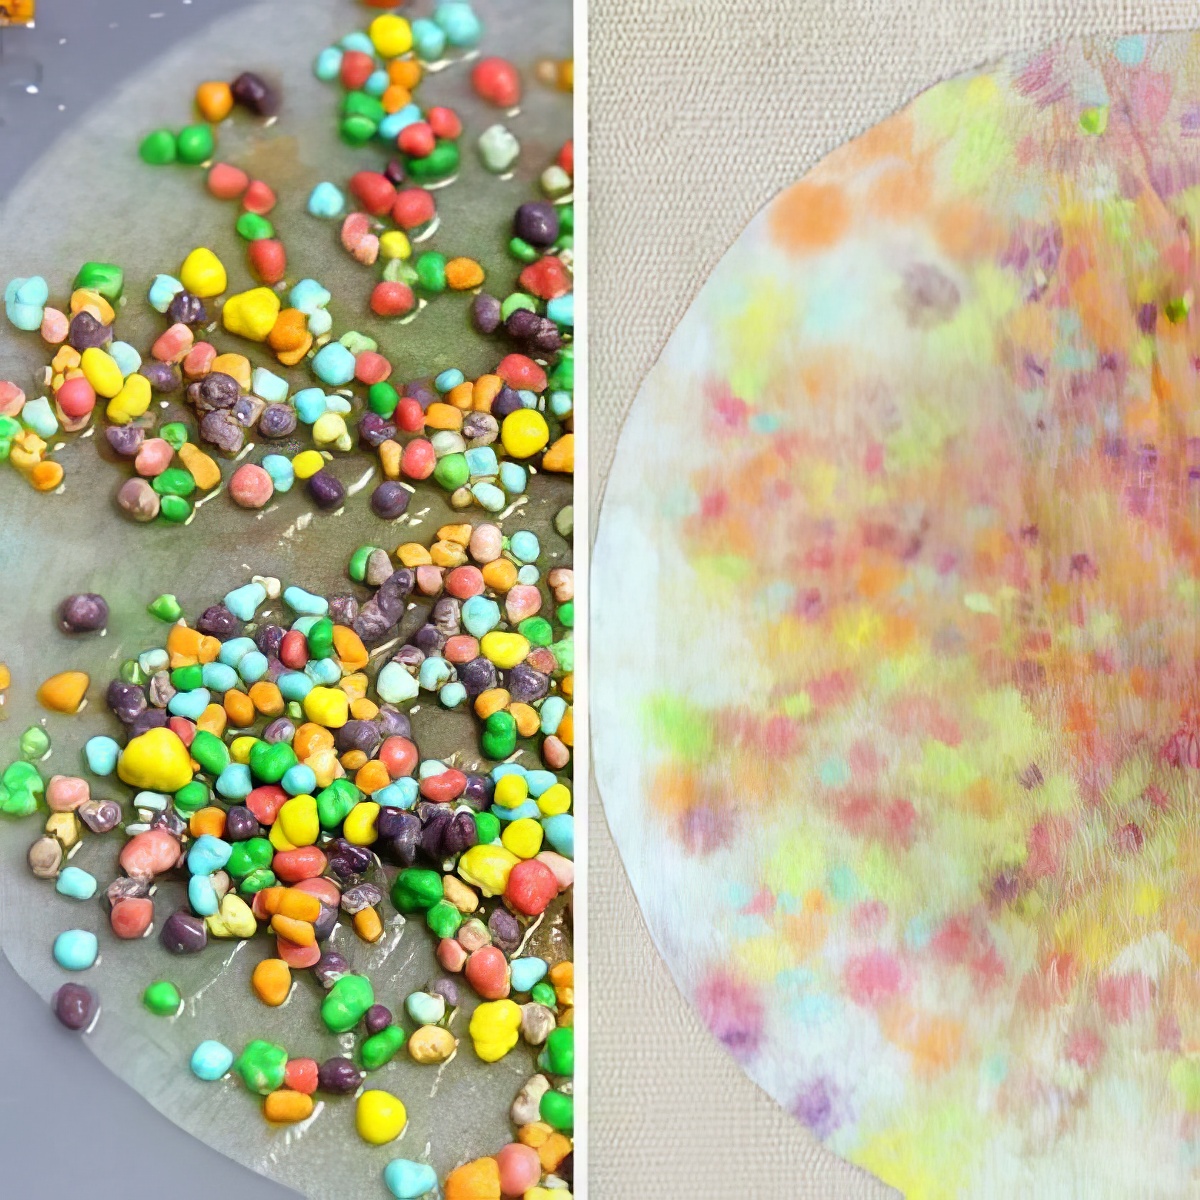 Learn this super fun and awesome candy chromatography with your kids! 